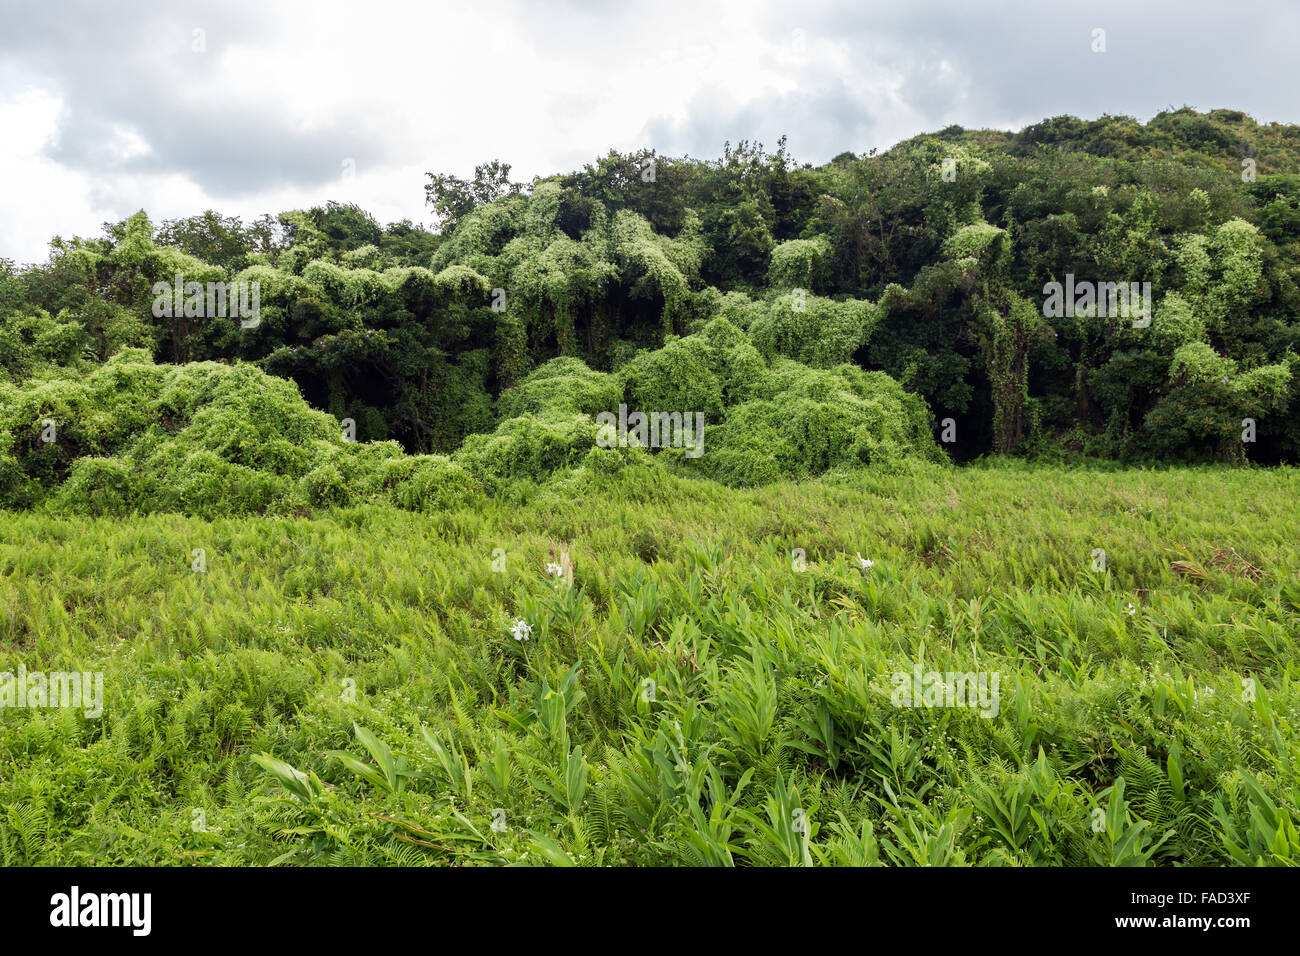 Meadow and forest scrambled over by Mikania (Mikania micrantha), a perennial herbaceous vine at the Lamma Island in Hong Kong. Stock Photo